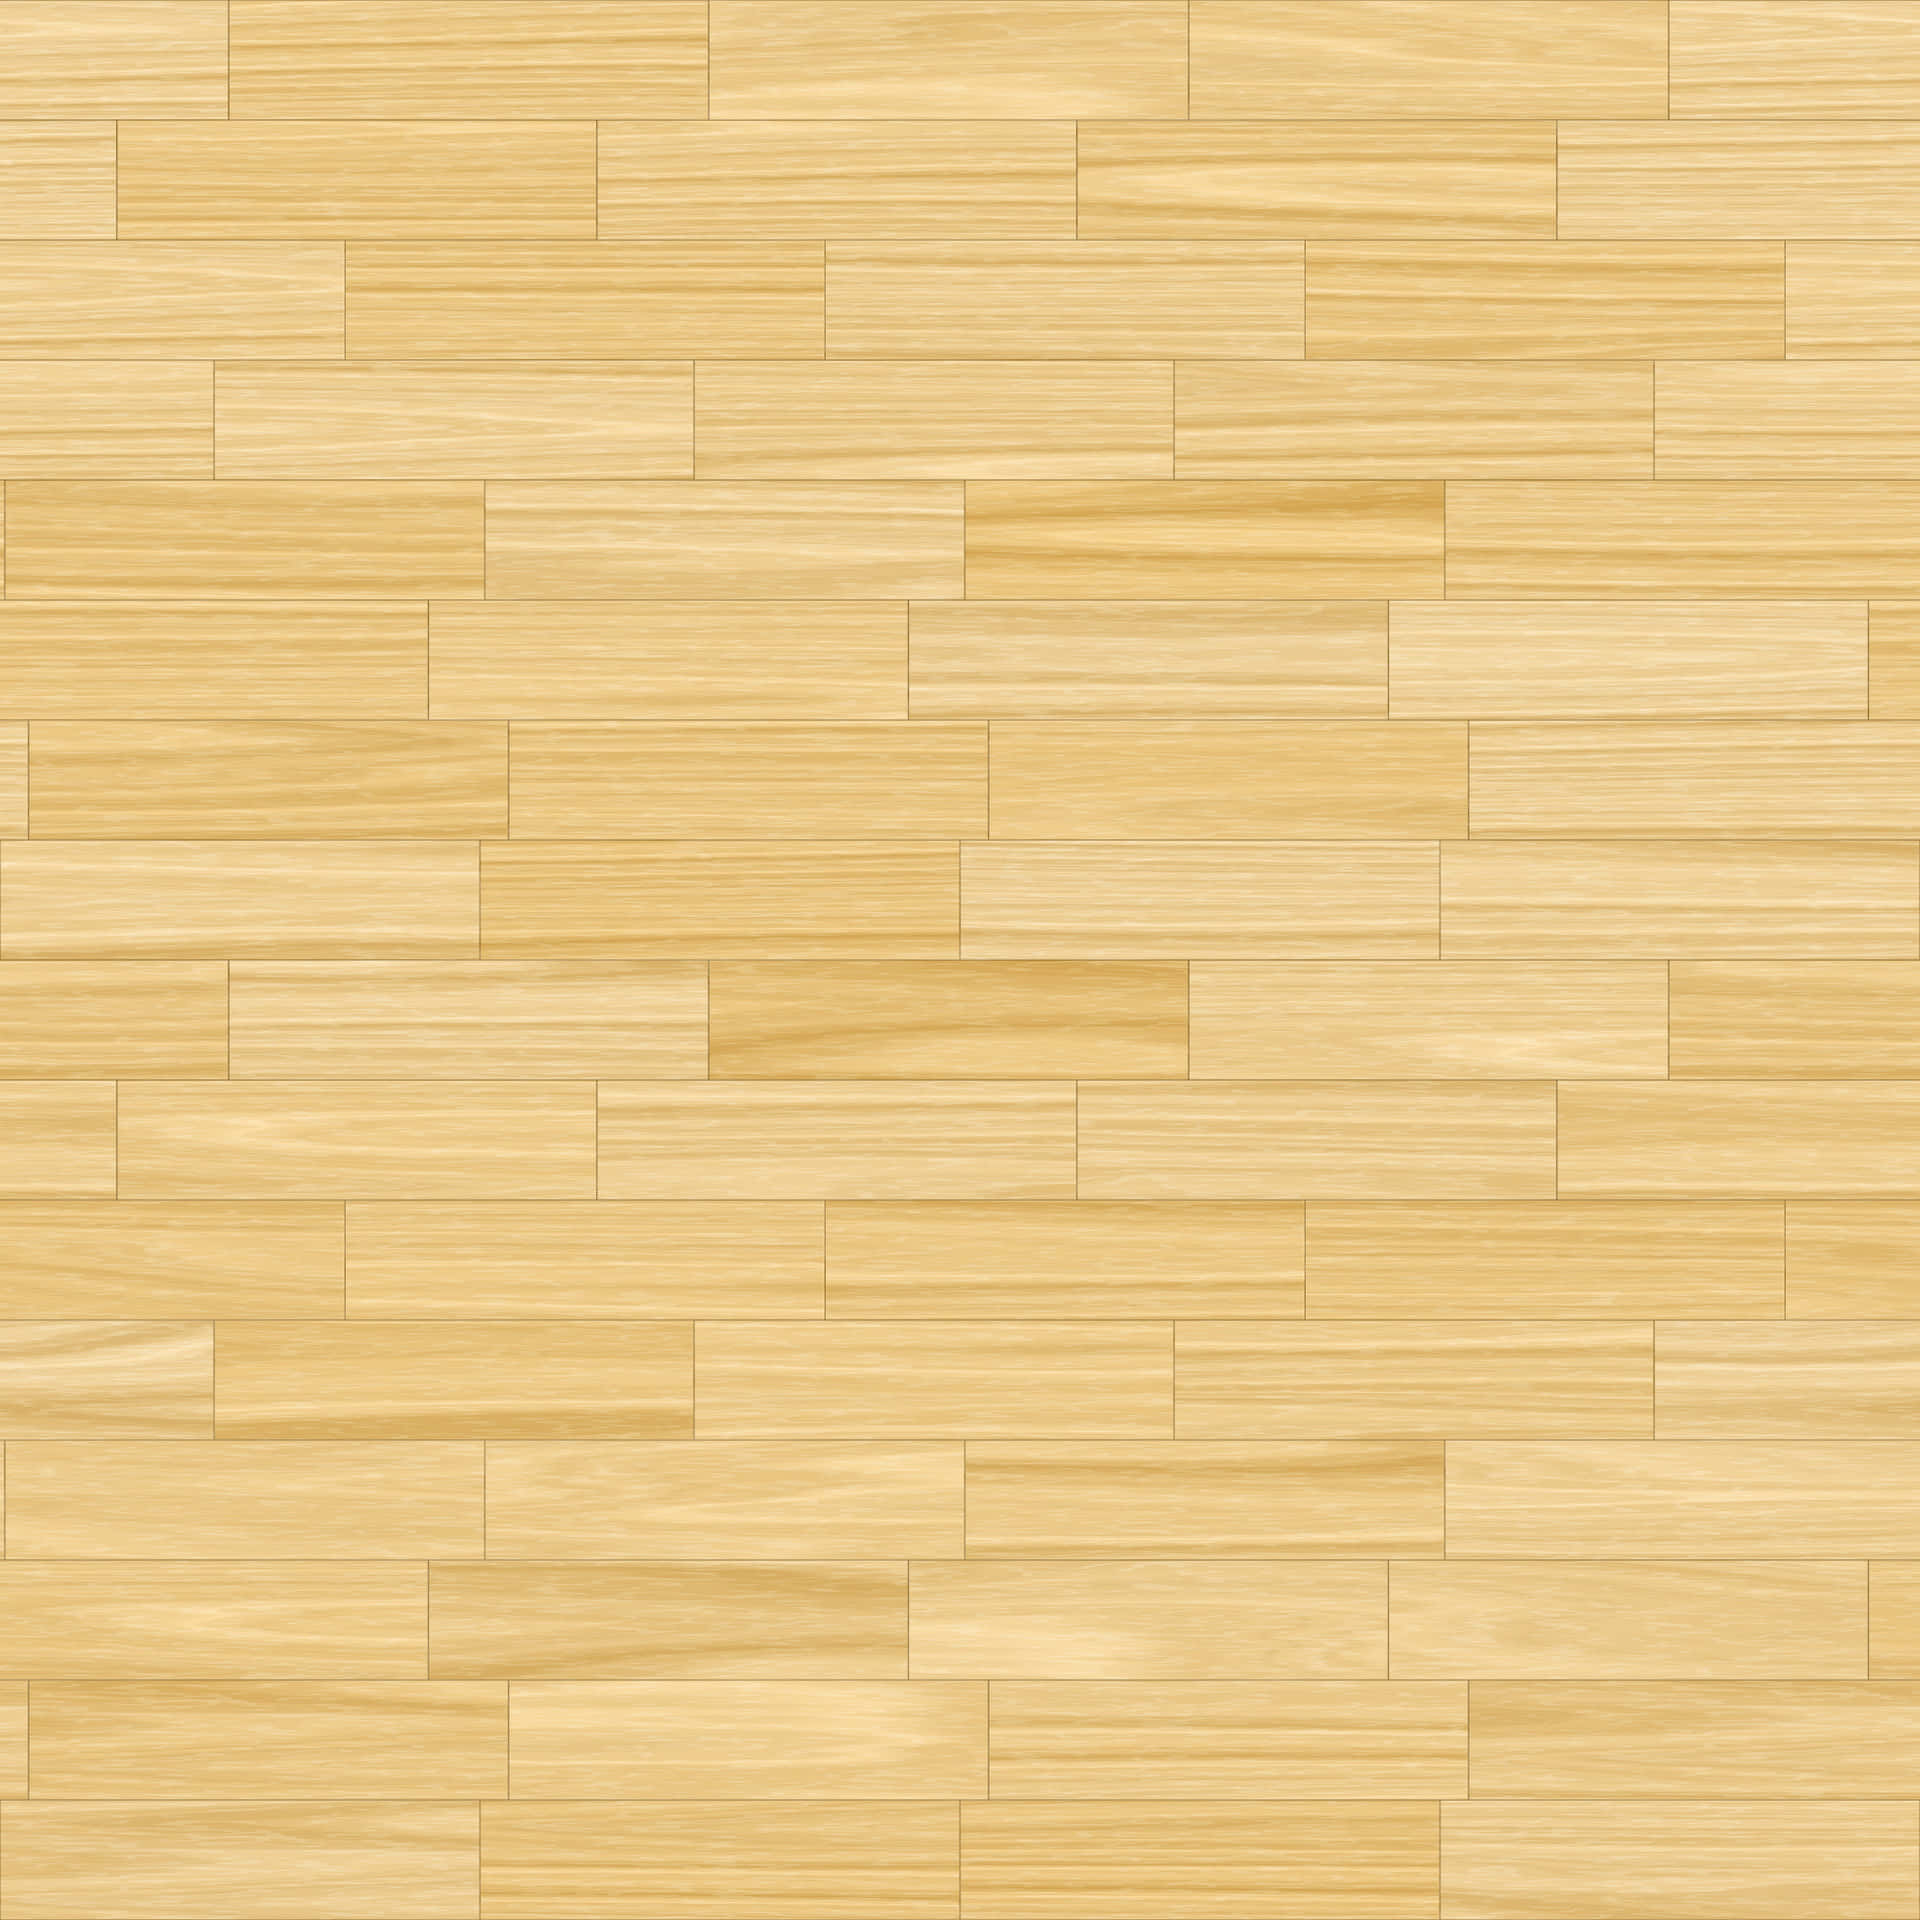 A Wooden Floor With A Wooden Texture